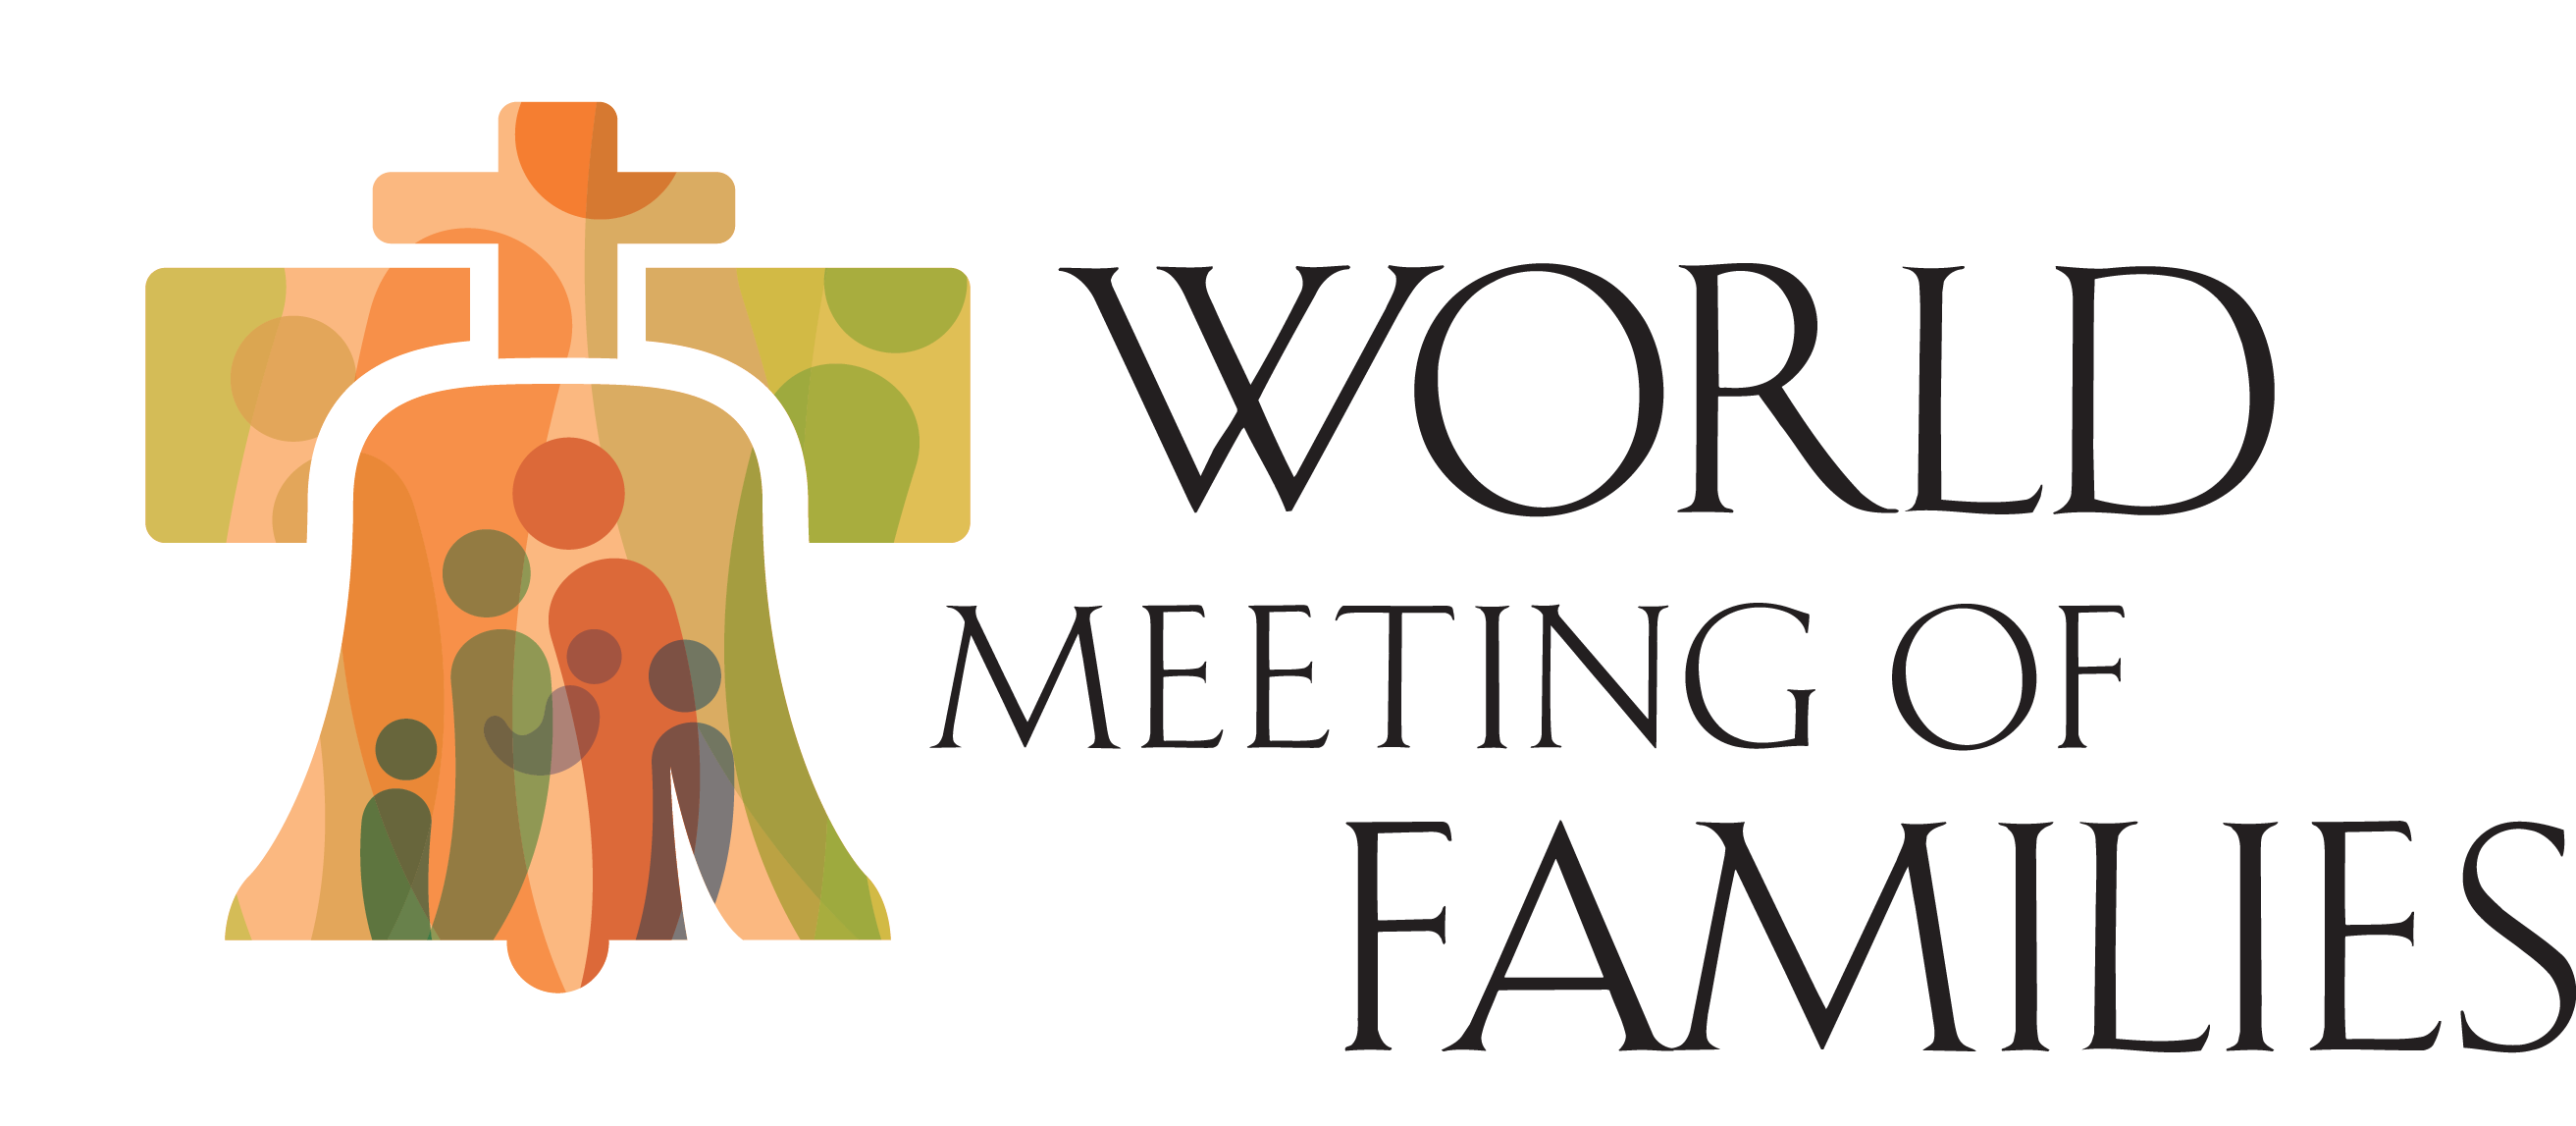 World Meeting of Families large